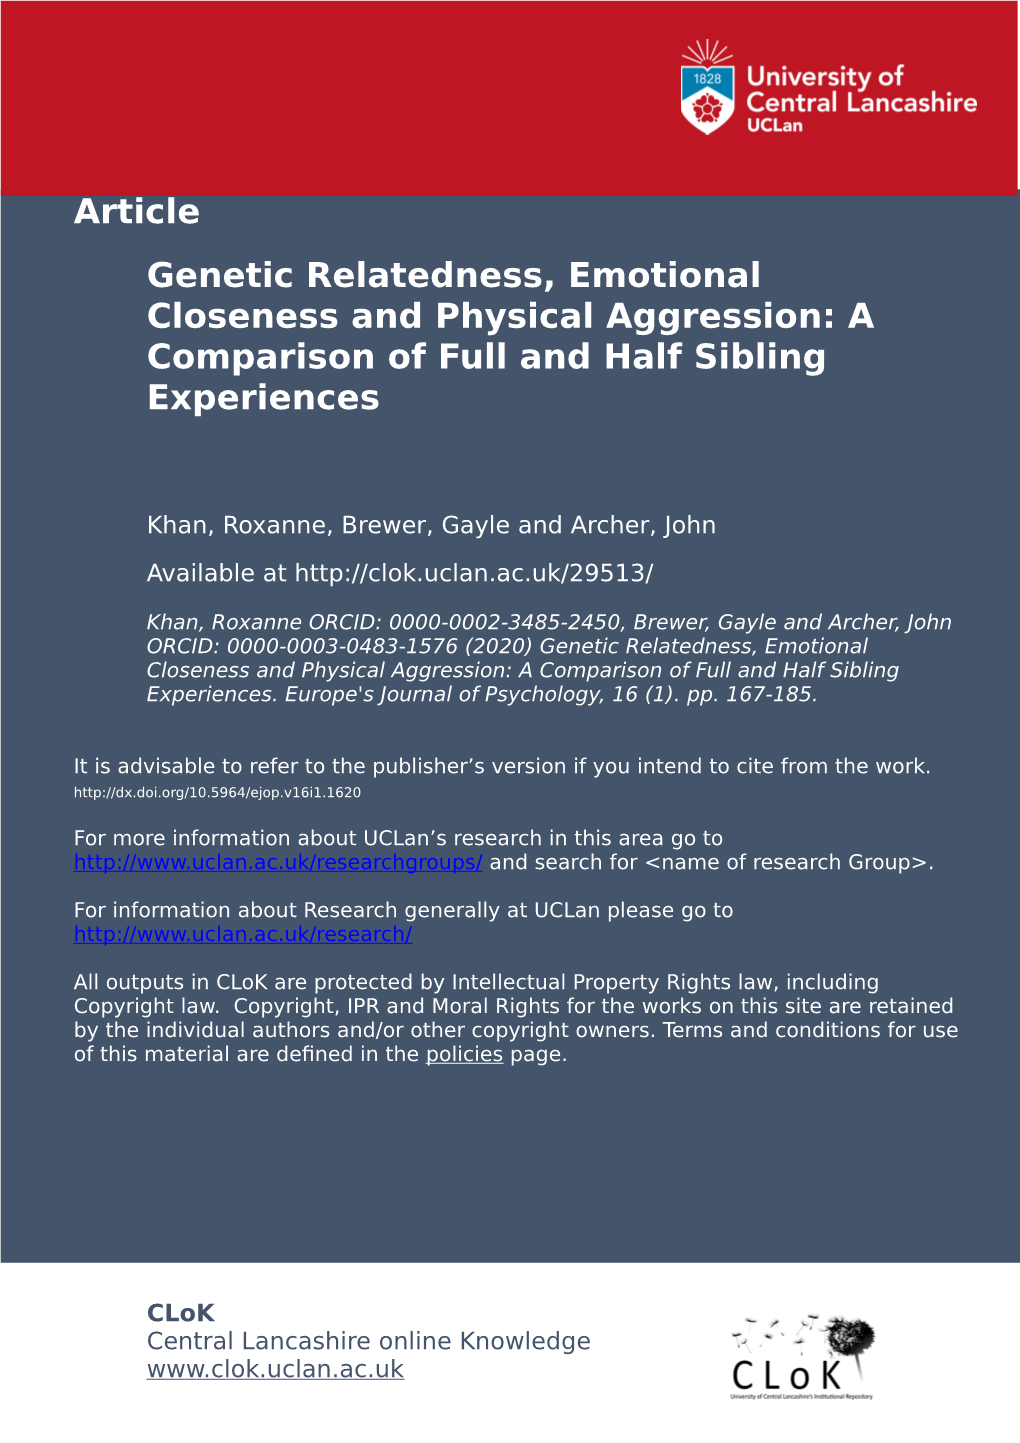 genetic-relatedness-emotional-closeness-and-physical-aggression-a